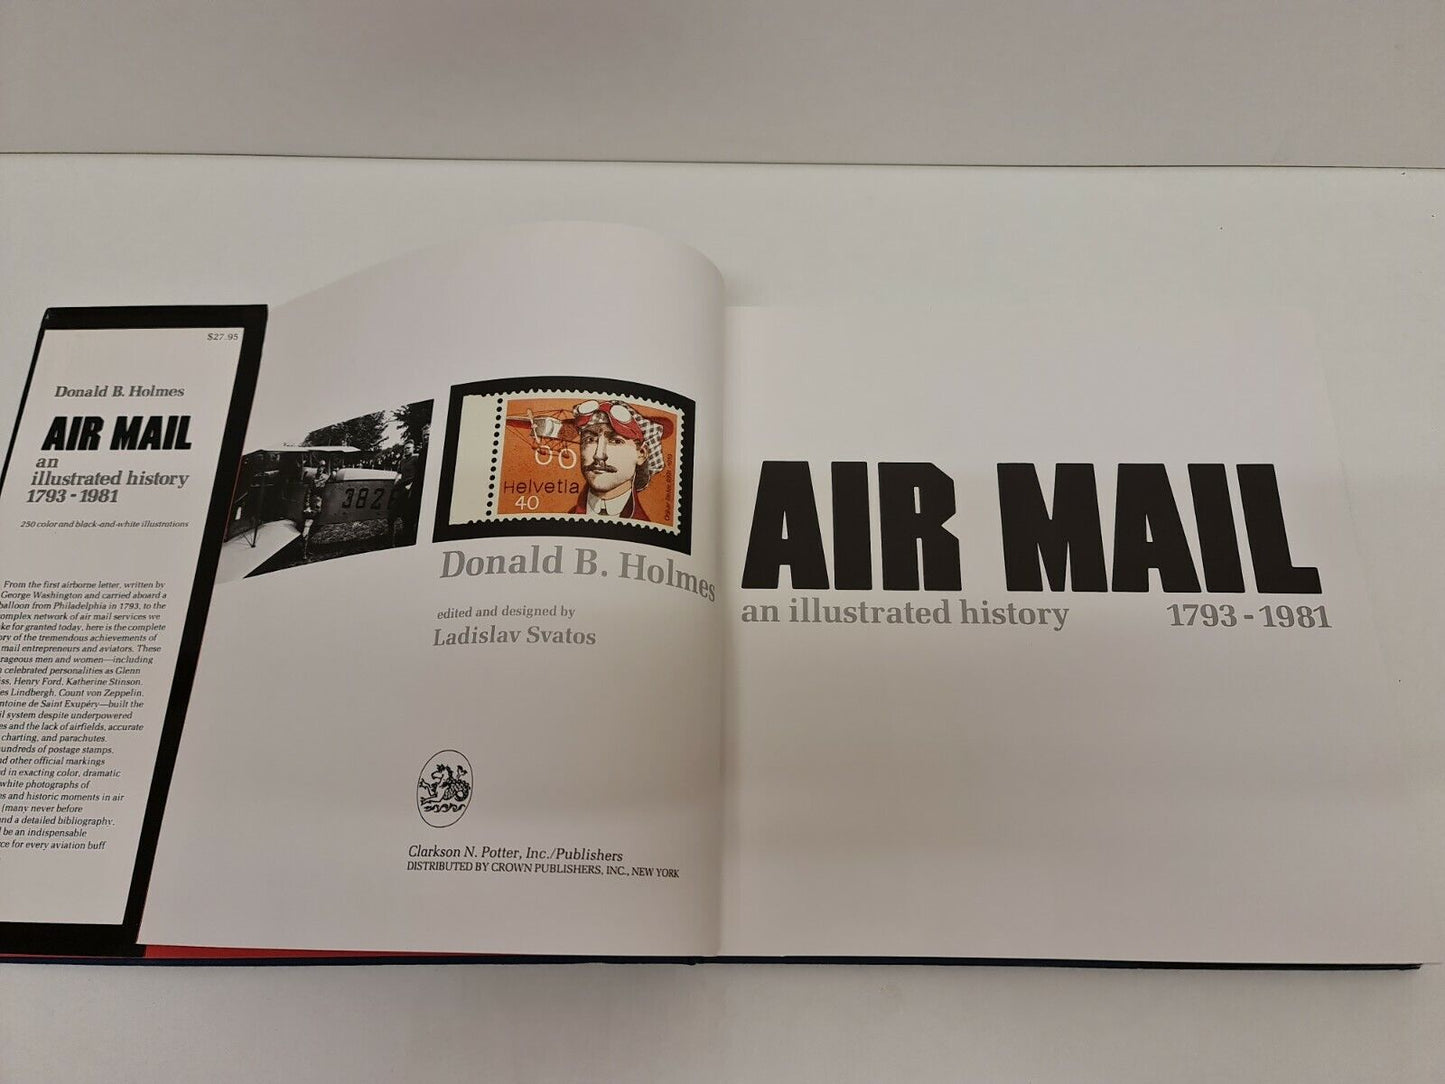 Air Mail: An Illustrated History, 1793-1981 by Donald B. Holmes